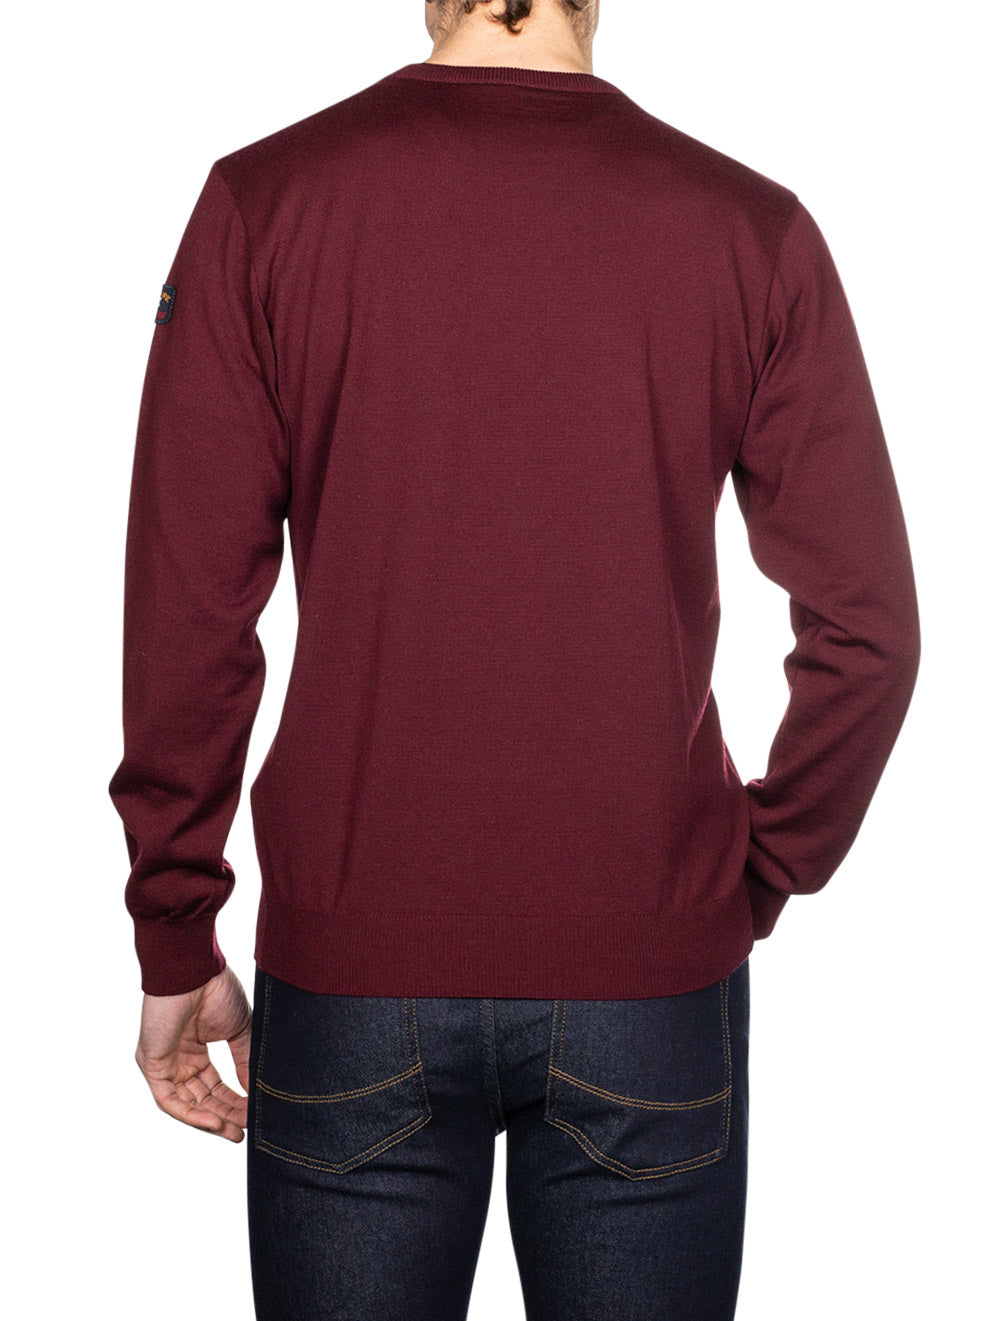 Knitted Roundneck Knitwear Wine